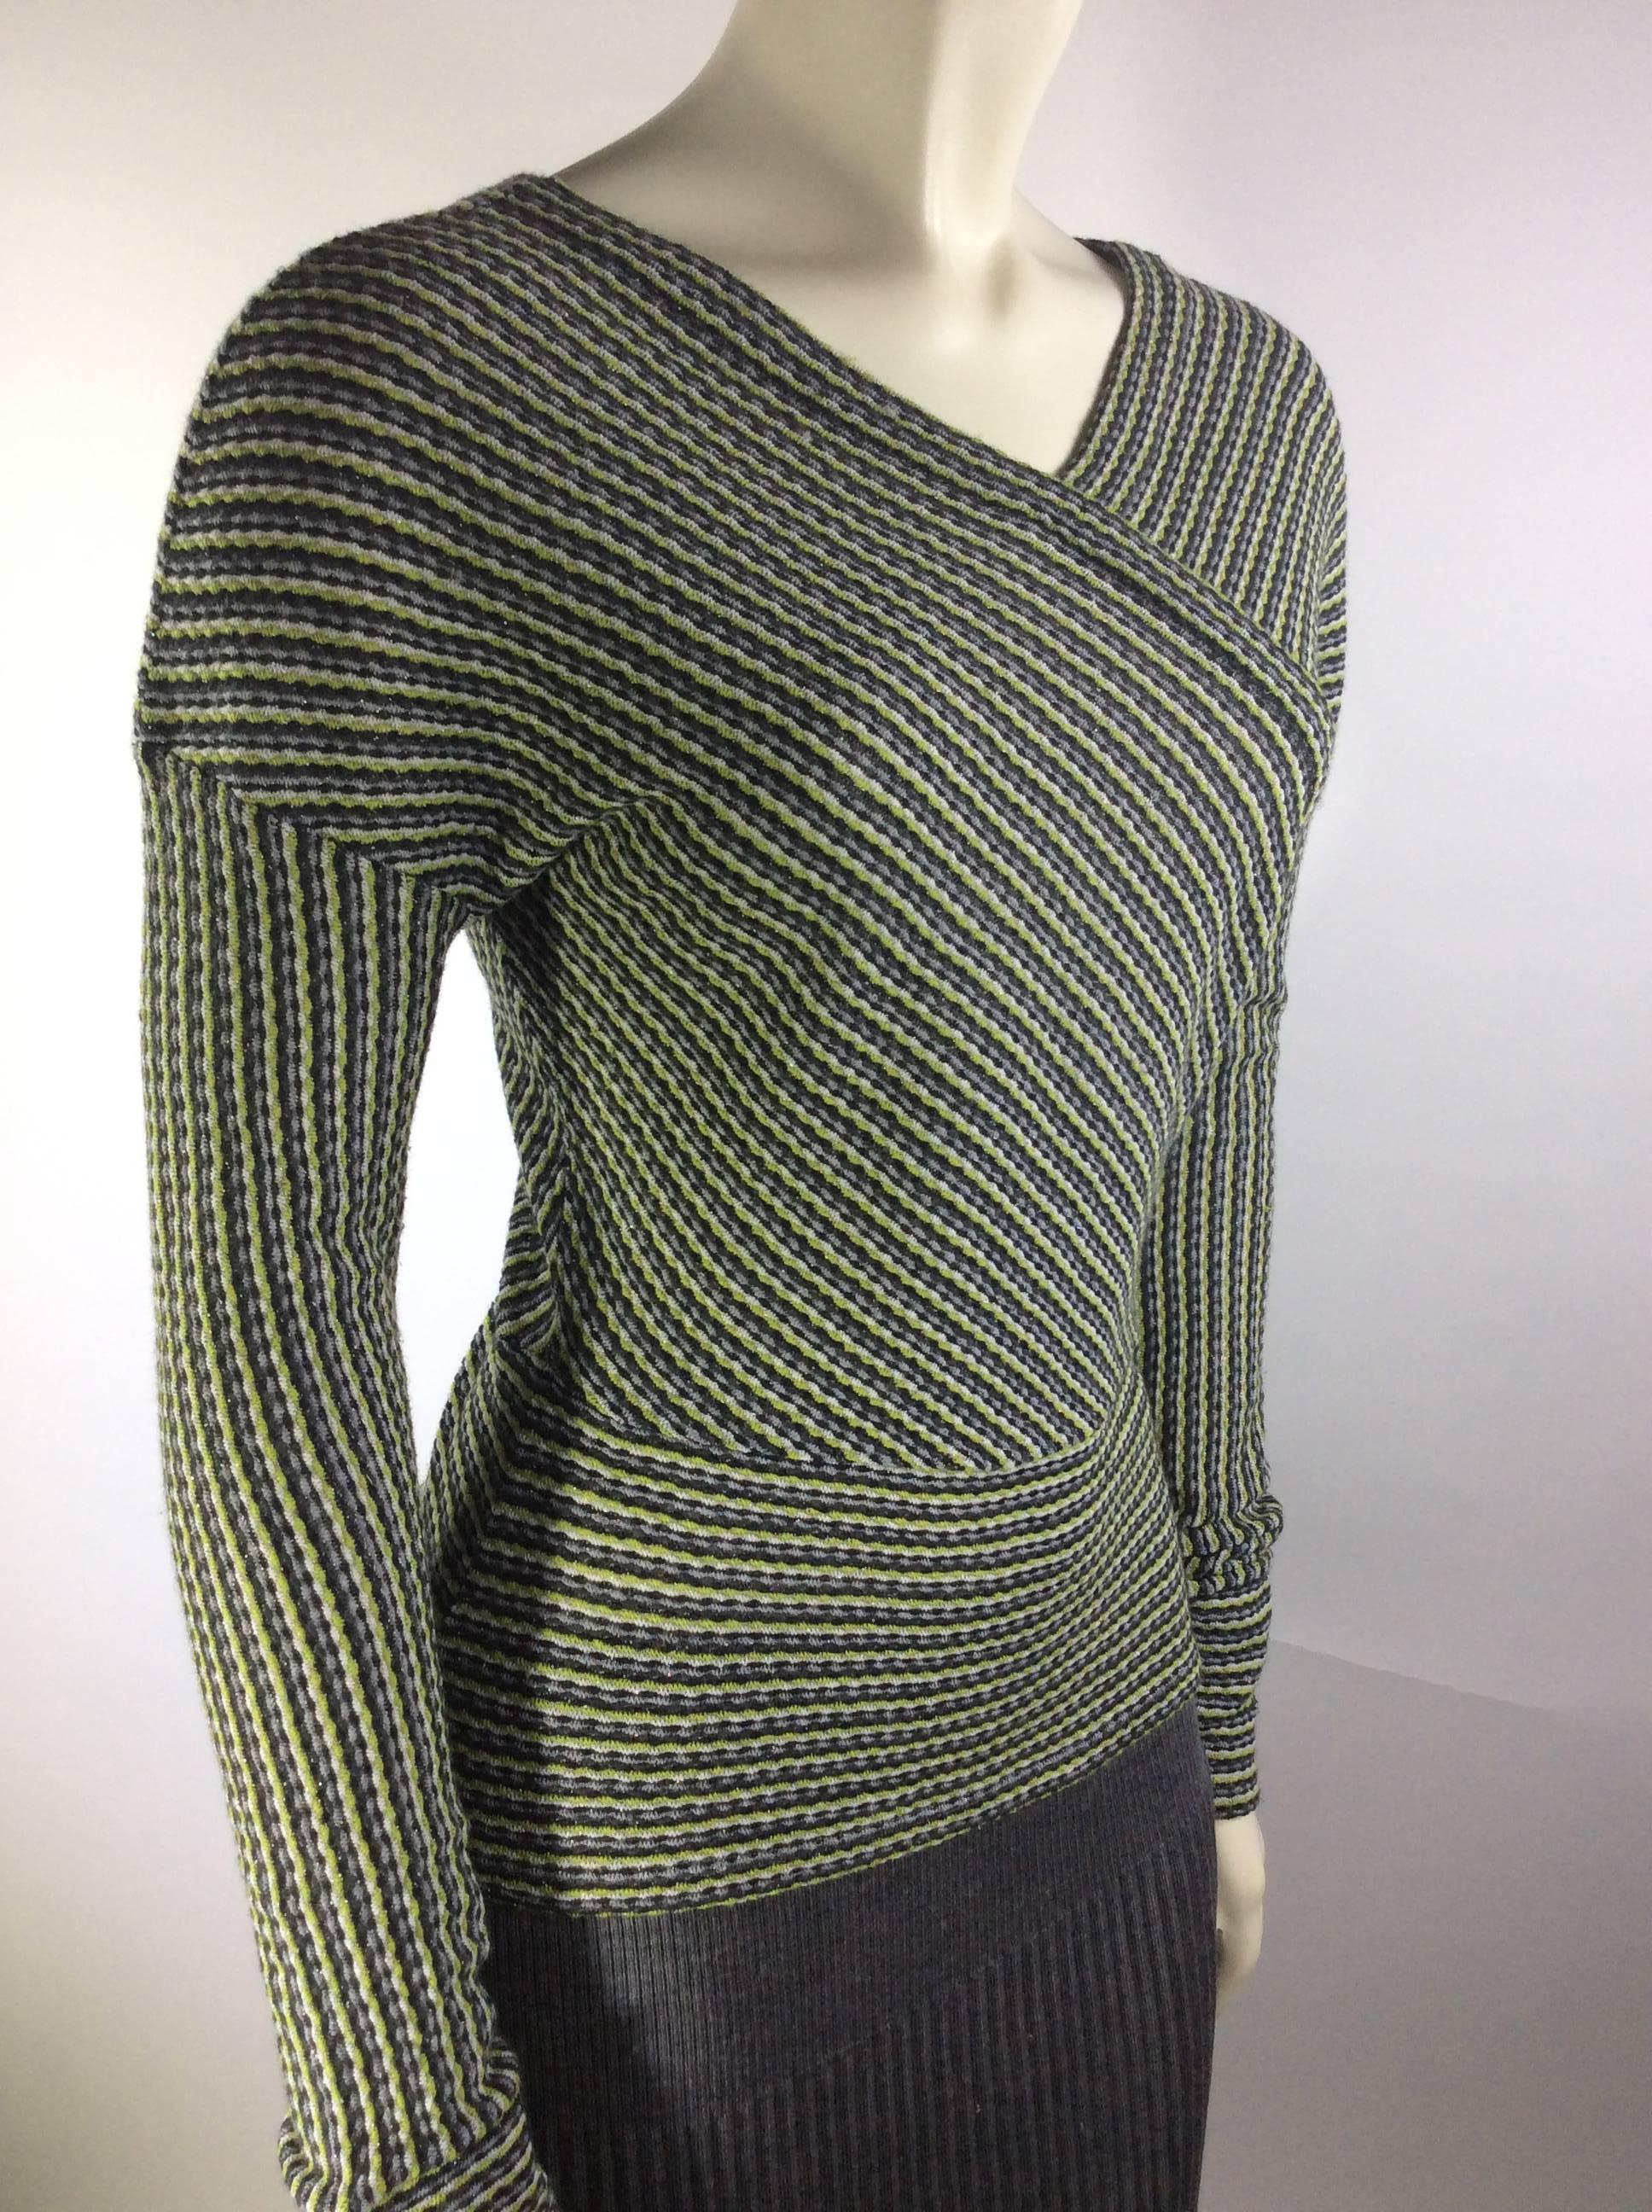 Women's Missoni Lime Green and Grey Skirt and Shirt Set